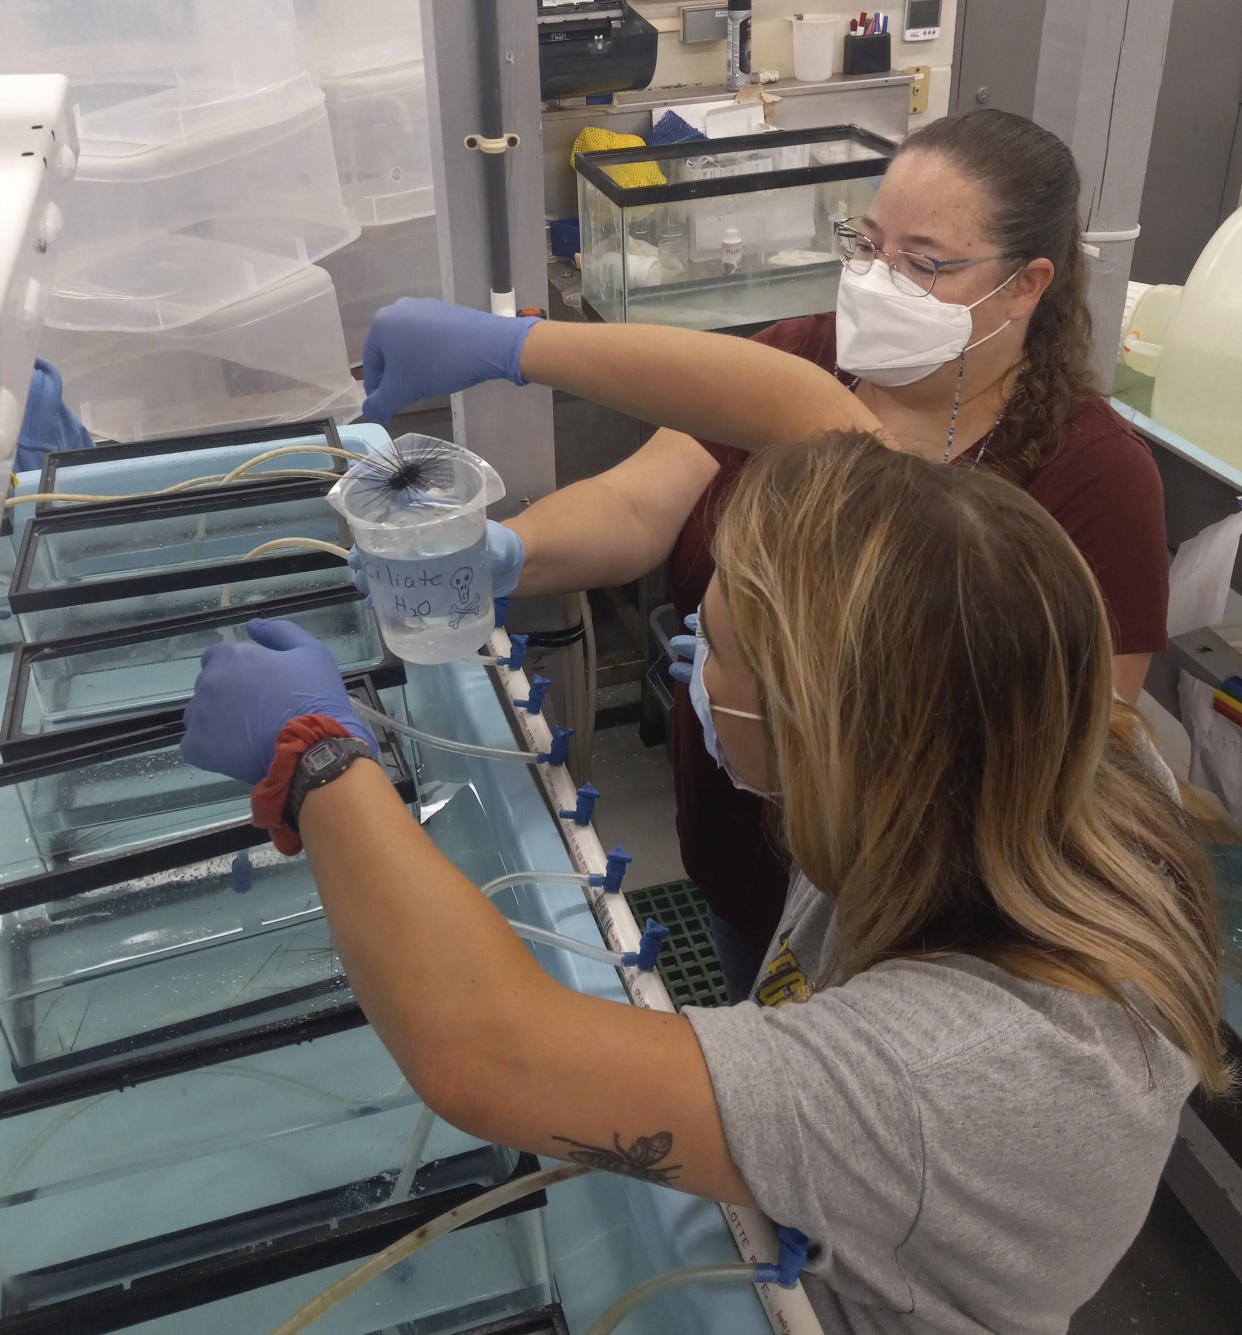 In this photo provided by researchers, University of South Florida researchers Mya Breitbart and Isabella Ritchie work with a sea urchin during a ciliate exposure experiment in the University of South Florida aquarium research facility in St. Petersburg, Fla., on July 7, 2022. A tiny single-celled organism is to blame for a massive die-off of sea urchins in the Caribbean in 2022, researchers reported Wednesday, April 19, 2023, in the journalScience Advances. (Makenzie Kerr/University of South Florida College of Marine Science via AP)